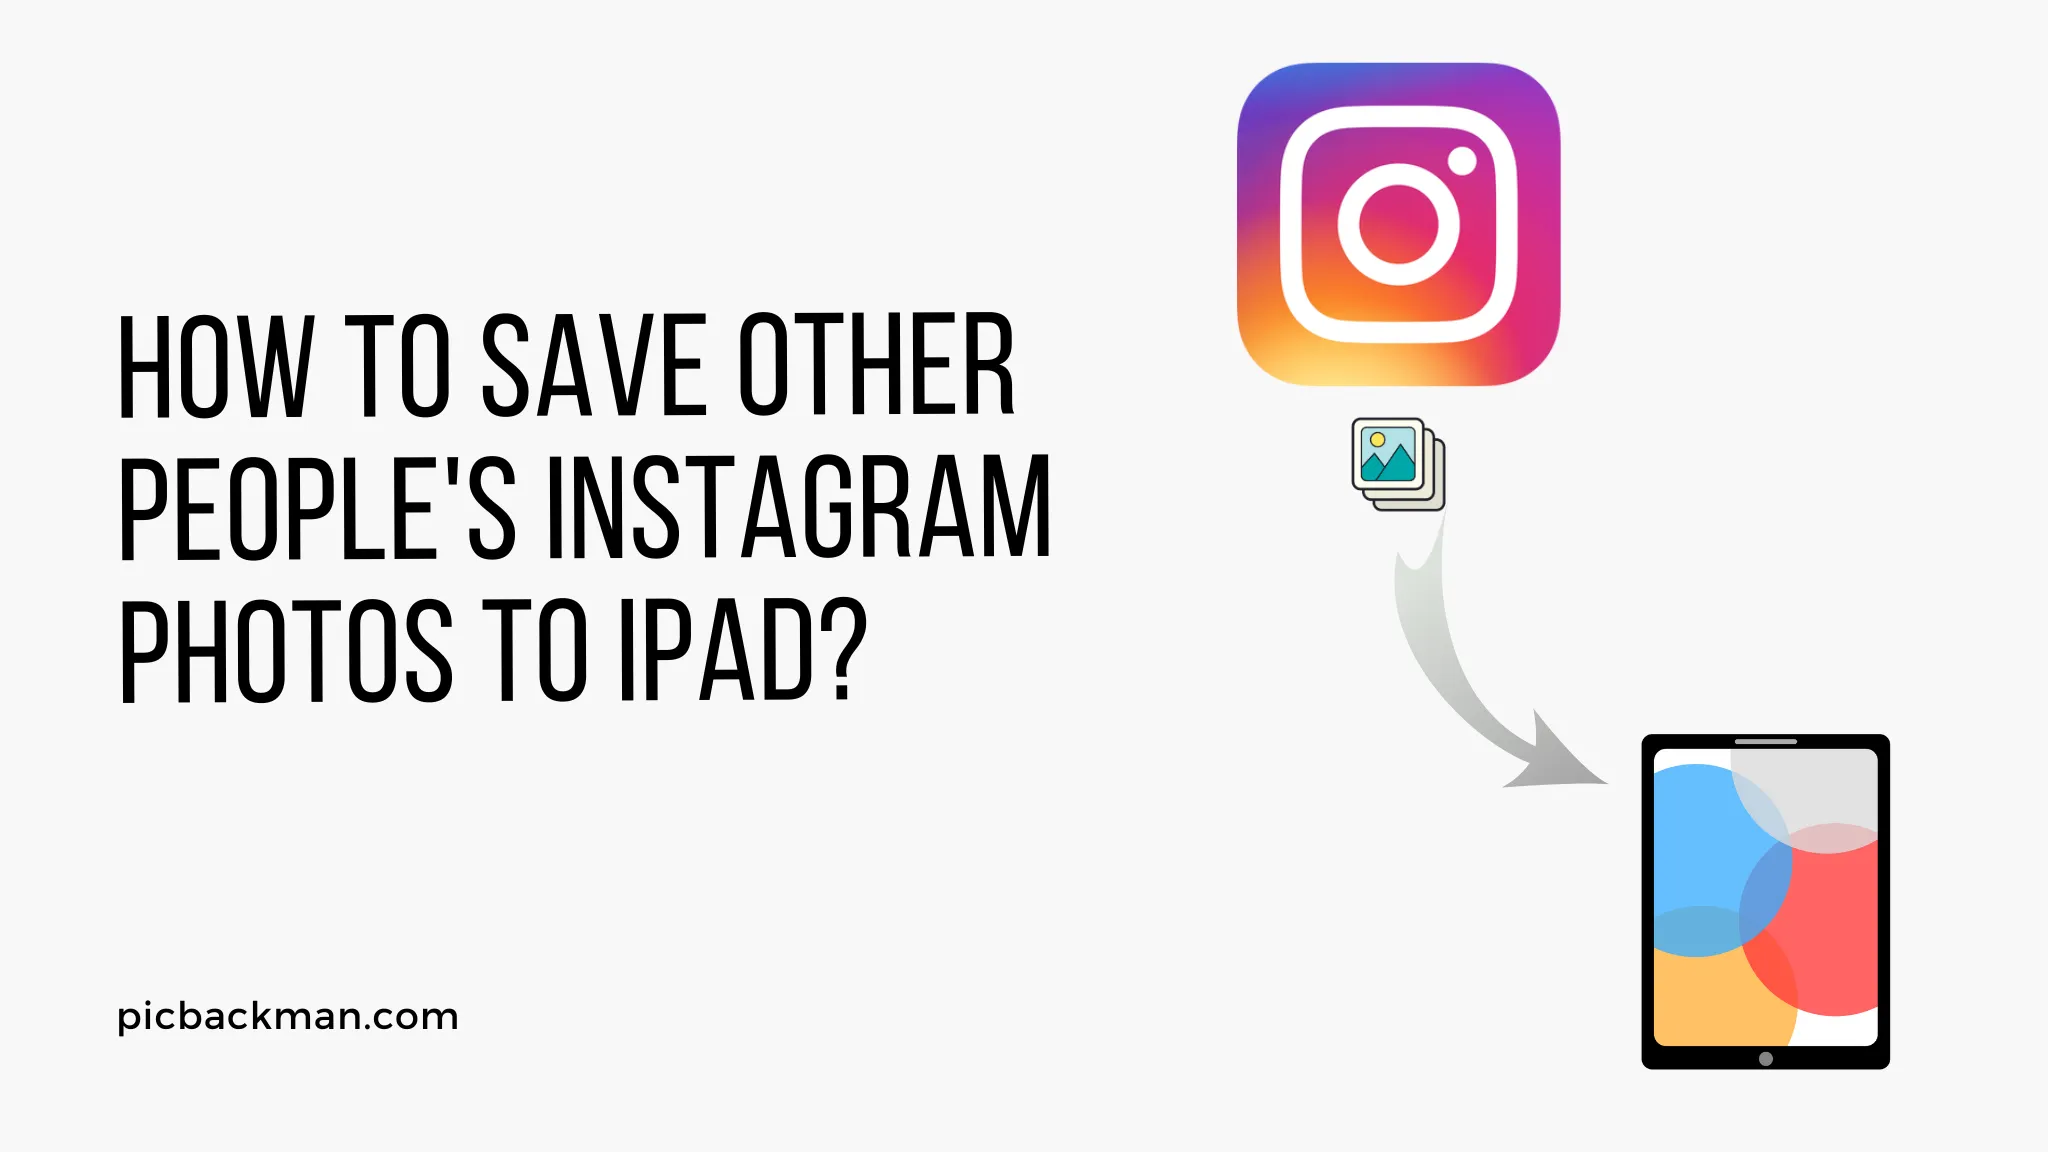 How to Save Other Peopleâ€™s Instagram Photos to iPad?